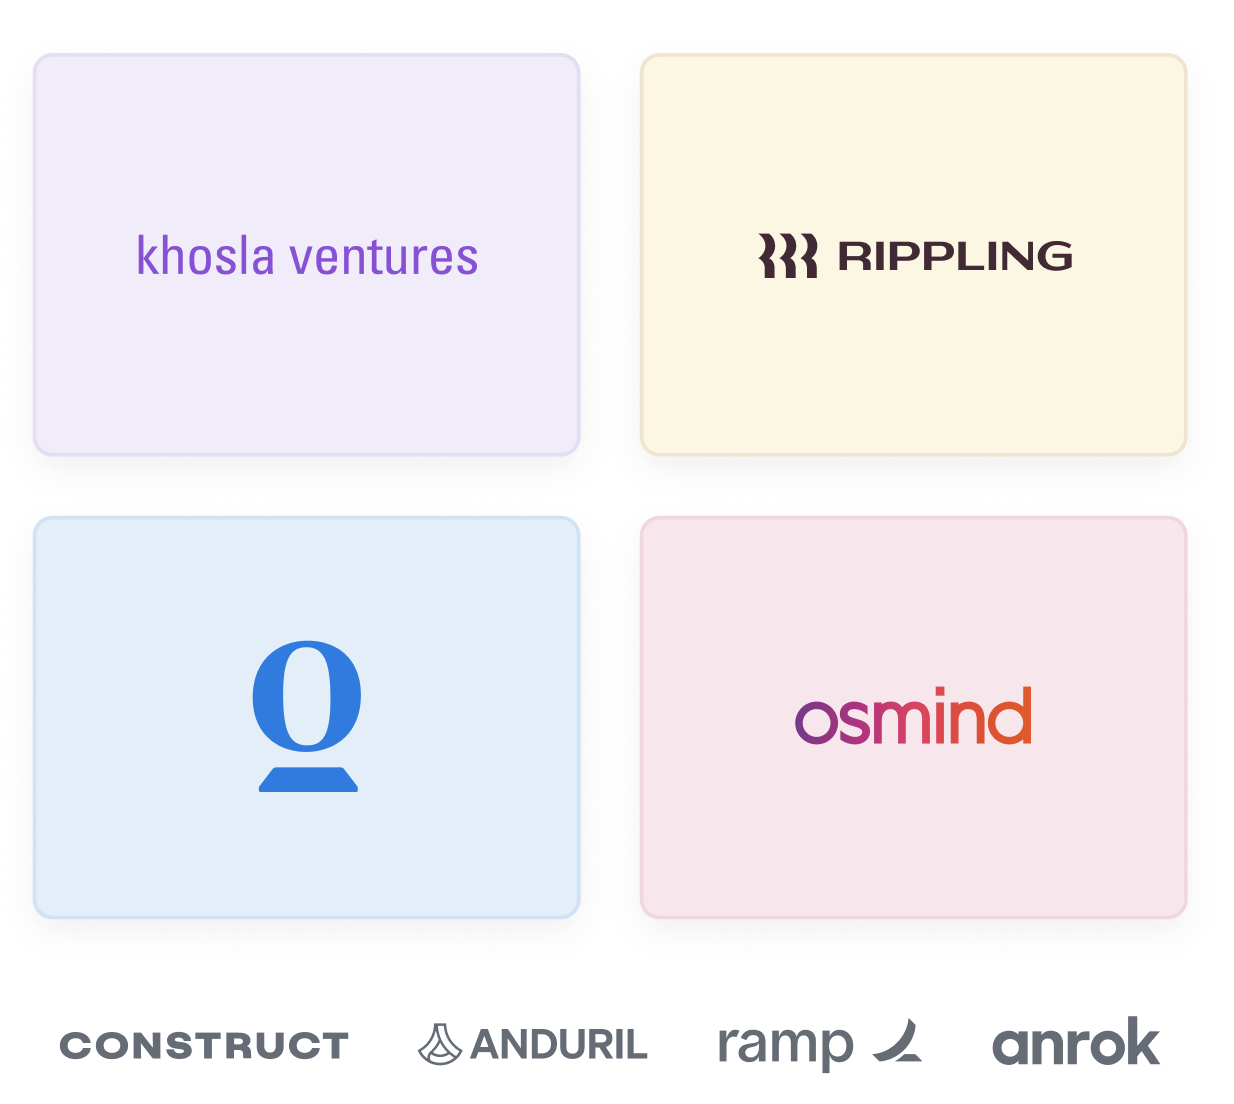 Images of the former companies of the founding team - Khosla Ventures, Osmind, Rippling, and Opendoor